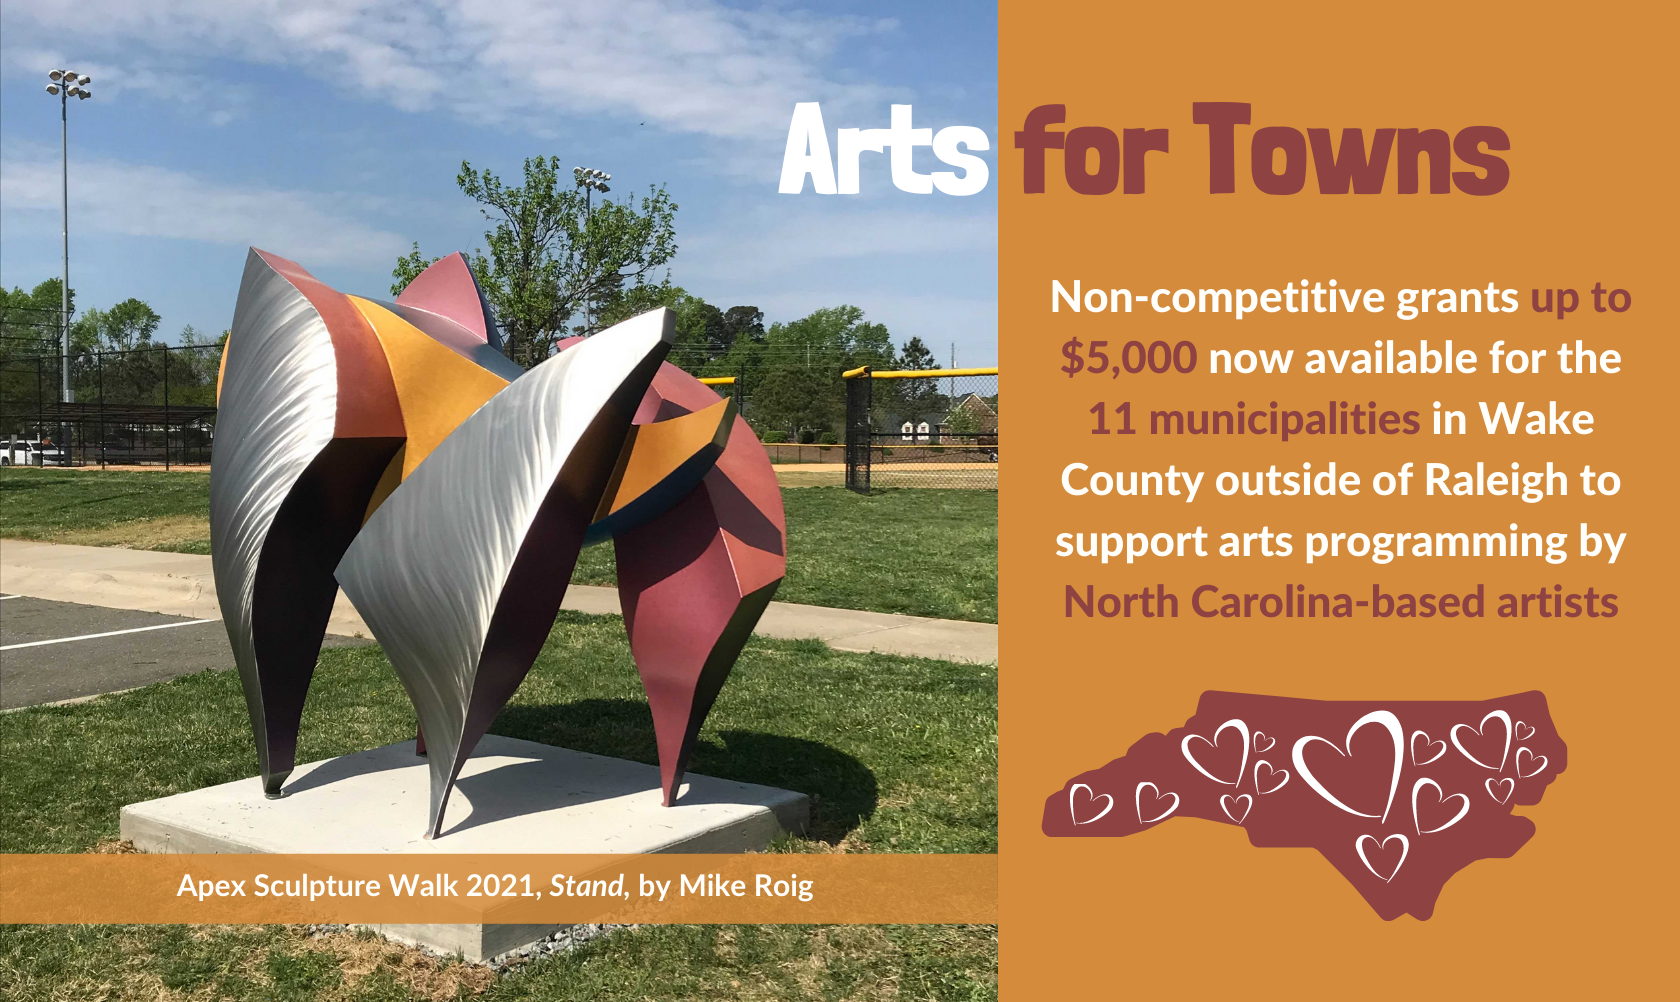 Non-competitive grants up to $5,000 now available for the 11 municipalities in Wake County outside of Raleigh to support arts programming by North Carolina-based artists Arts for Towns with photo of an outdoor sculpture in orange, red and silver by Mike Roig